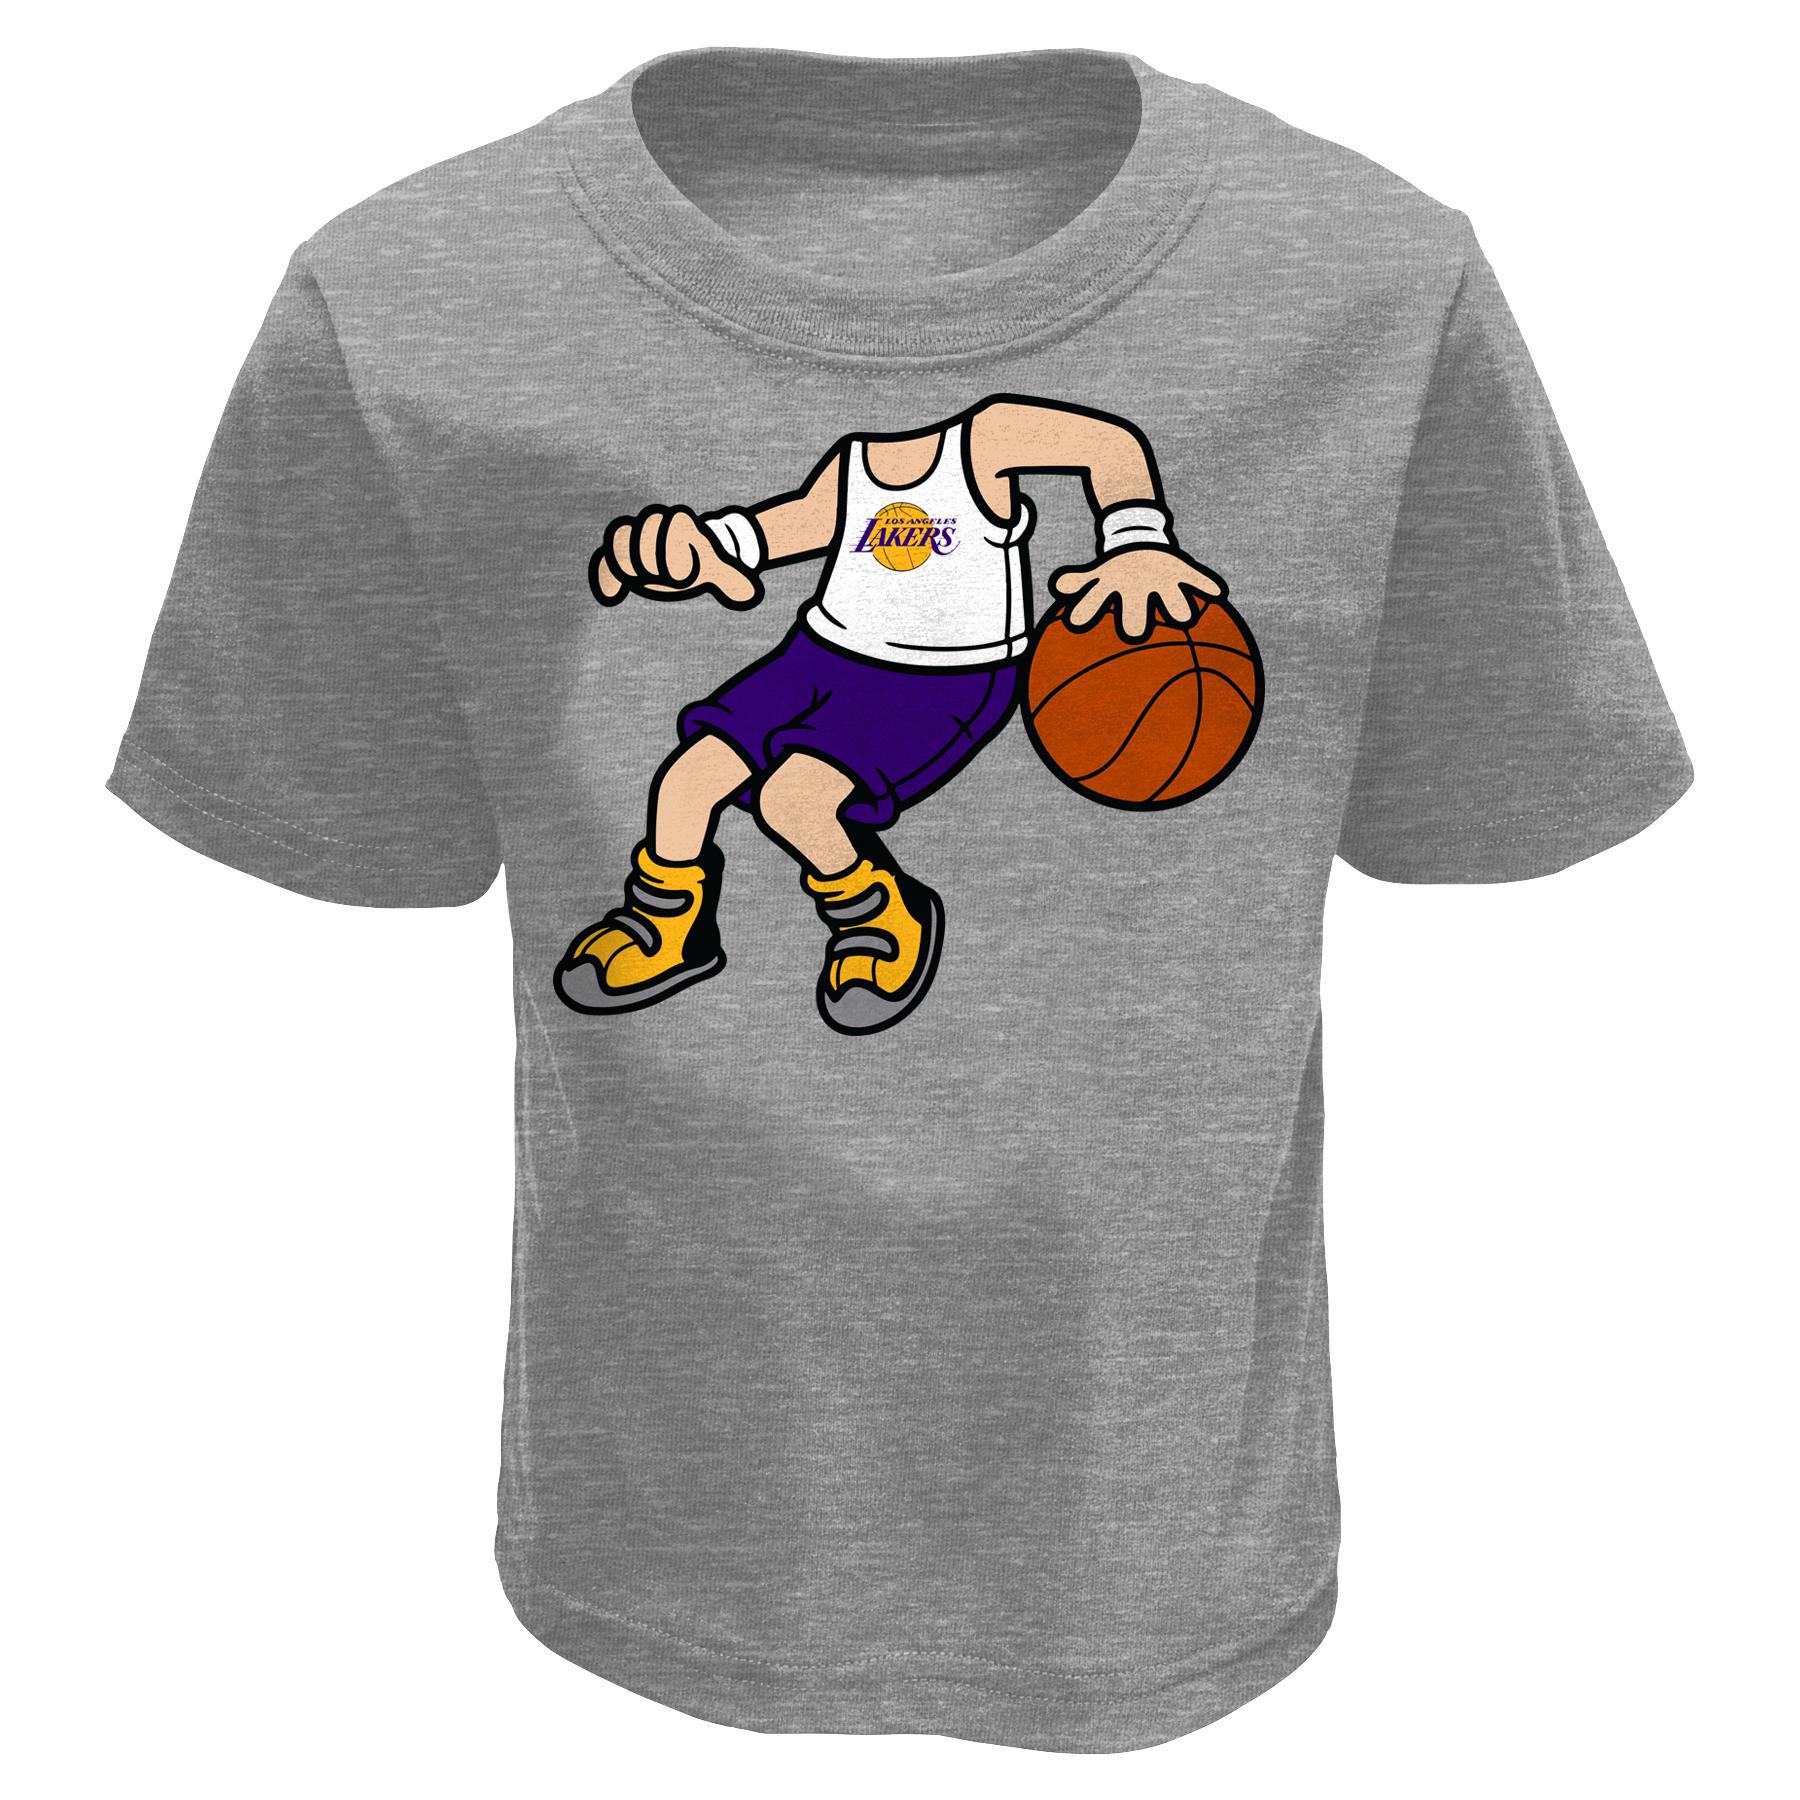 NBA Toddler Boys' Graphic T-Shirt - Los Angeles Lakers